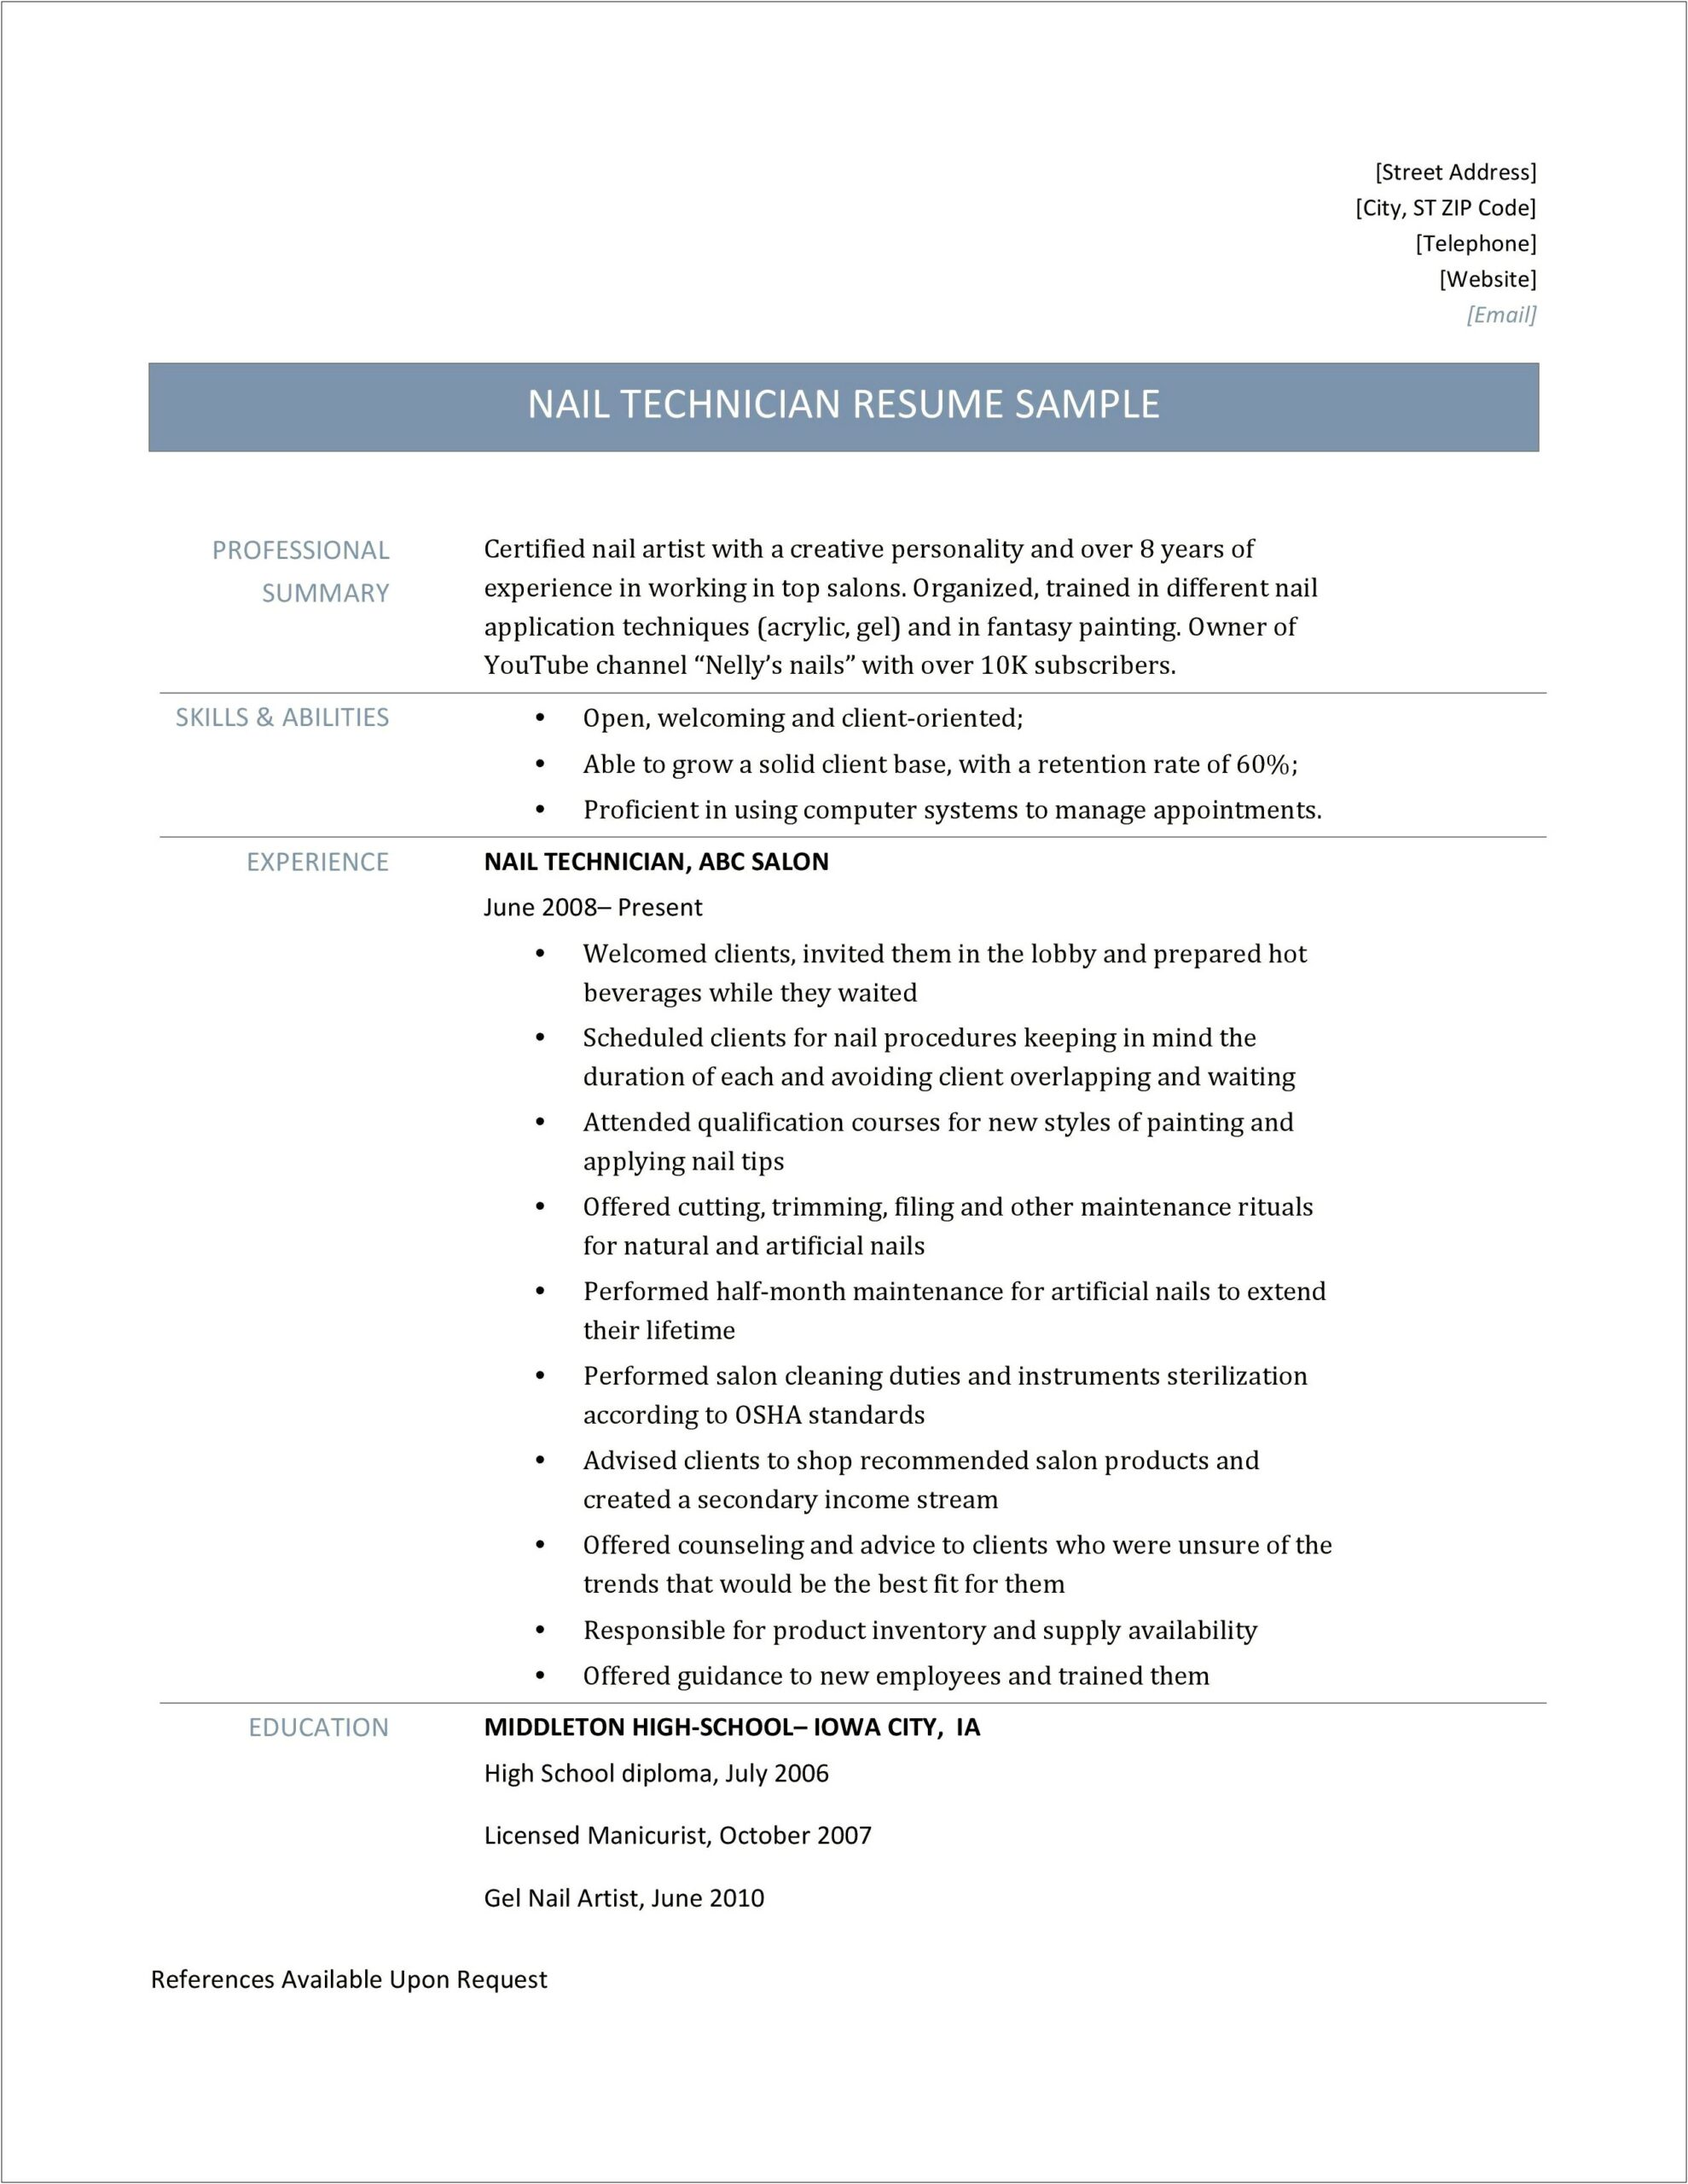 Sample Resume For Nail Technicians